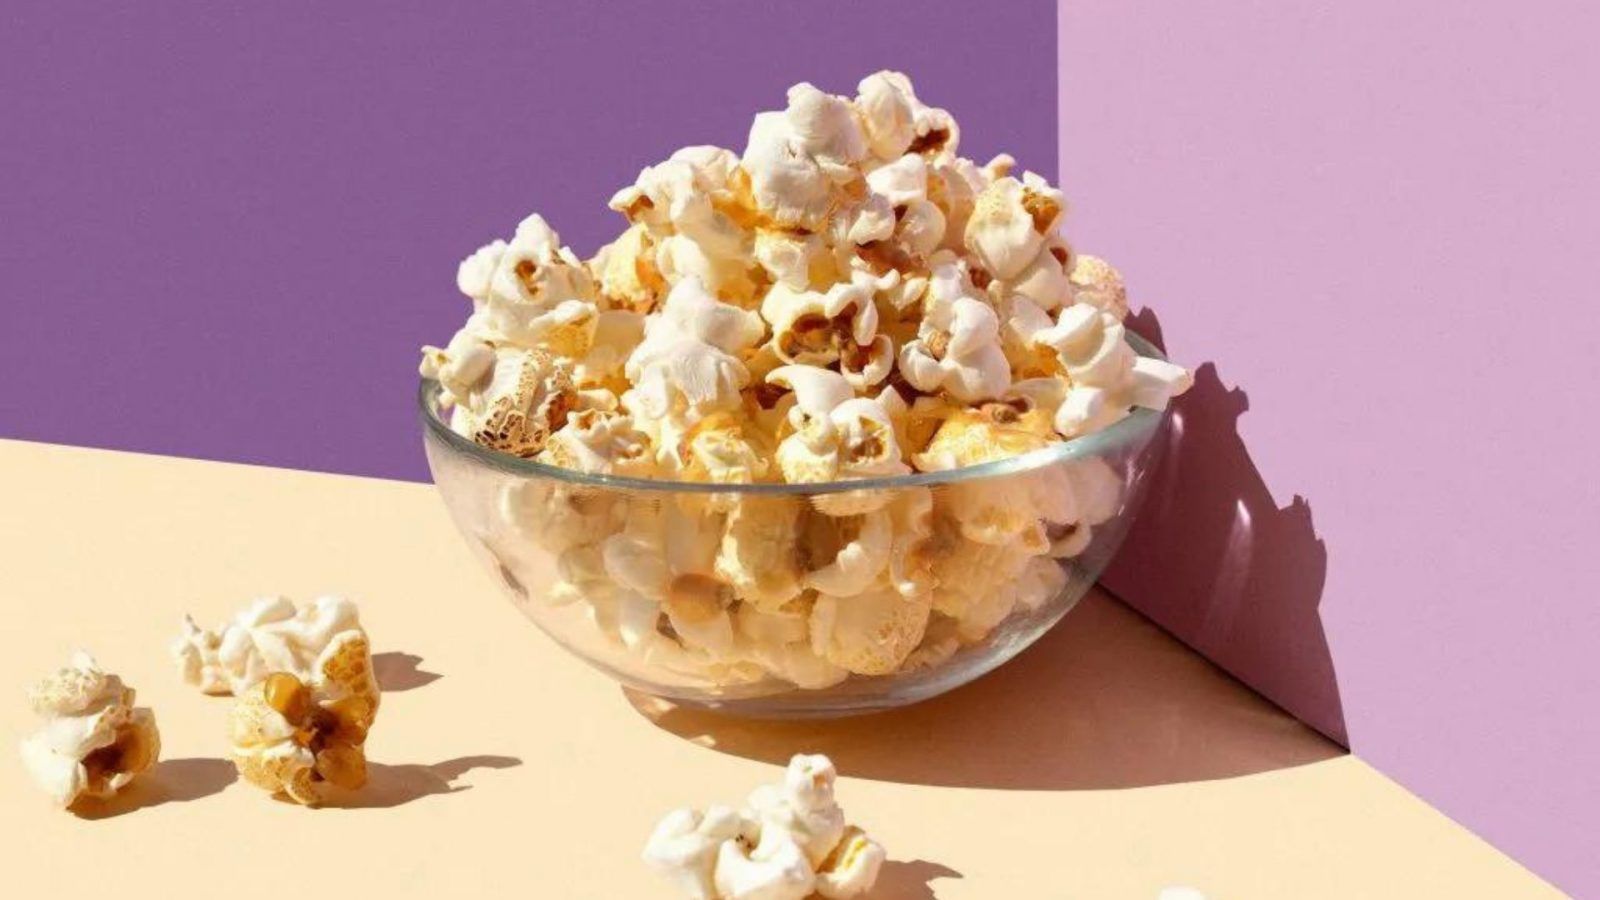 Is popcorn healthy? Here’s what dietitians really think